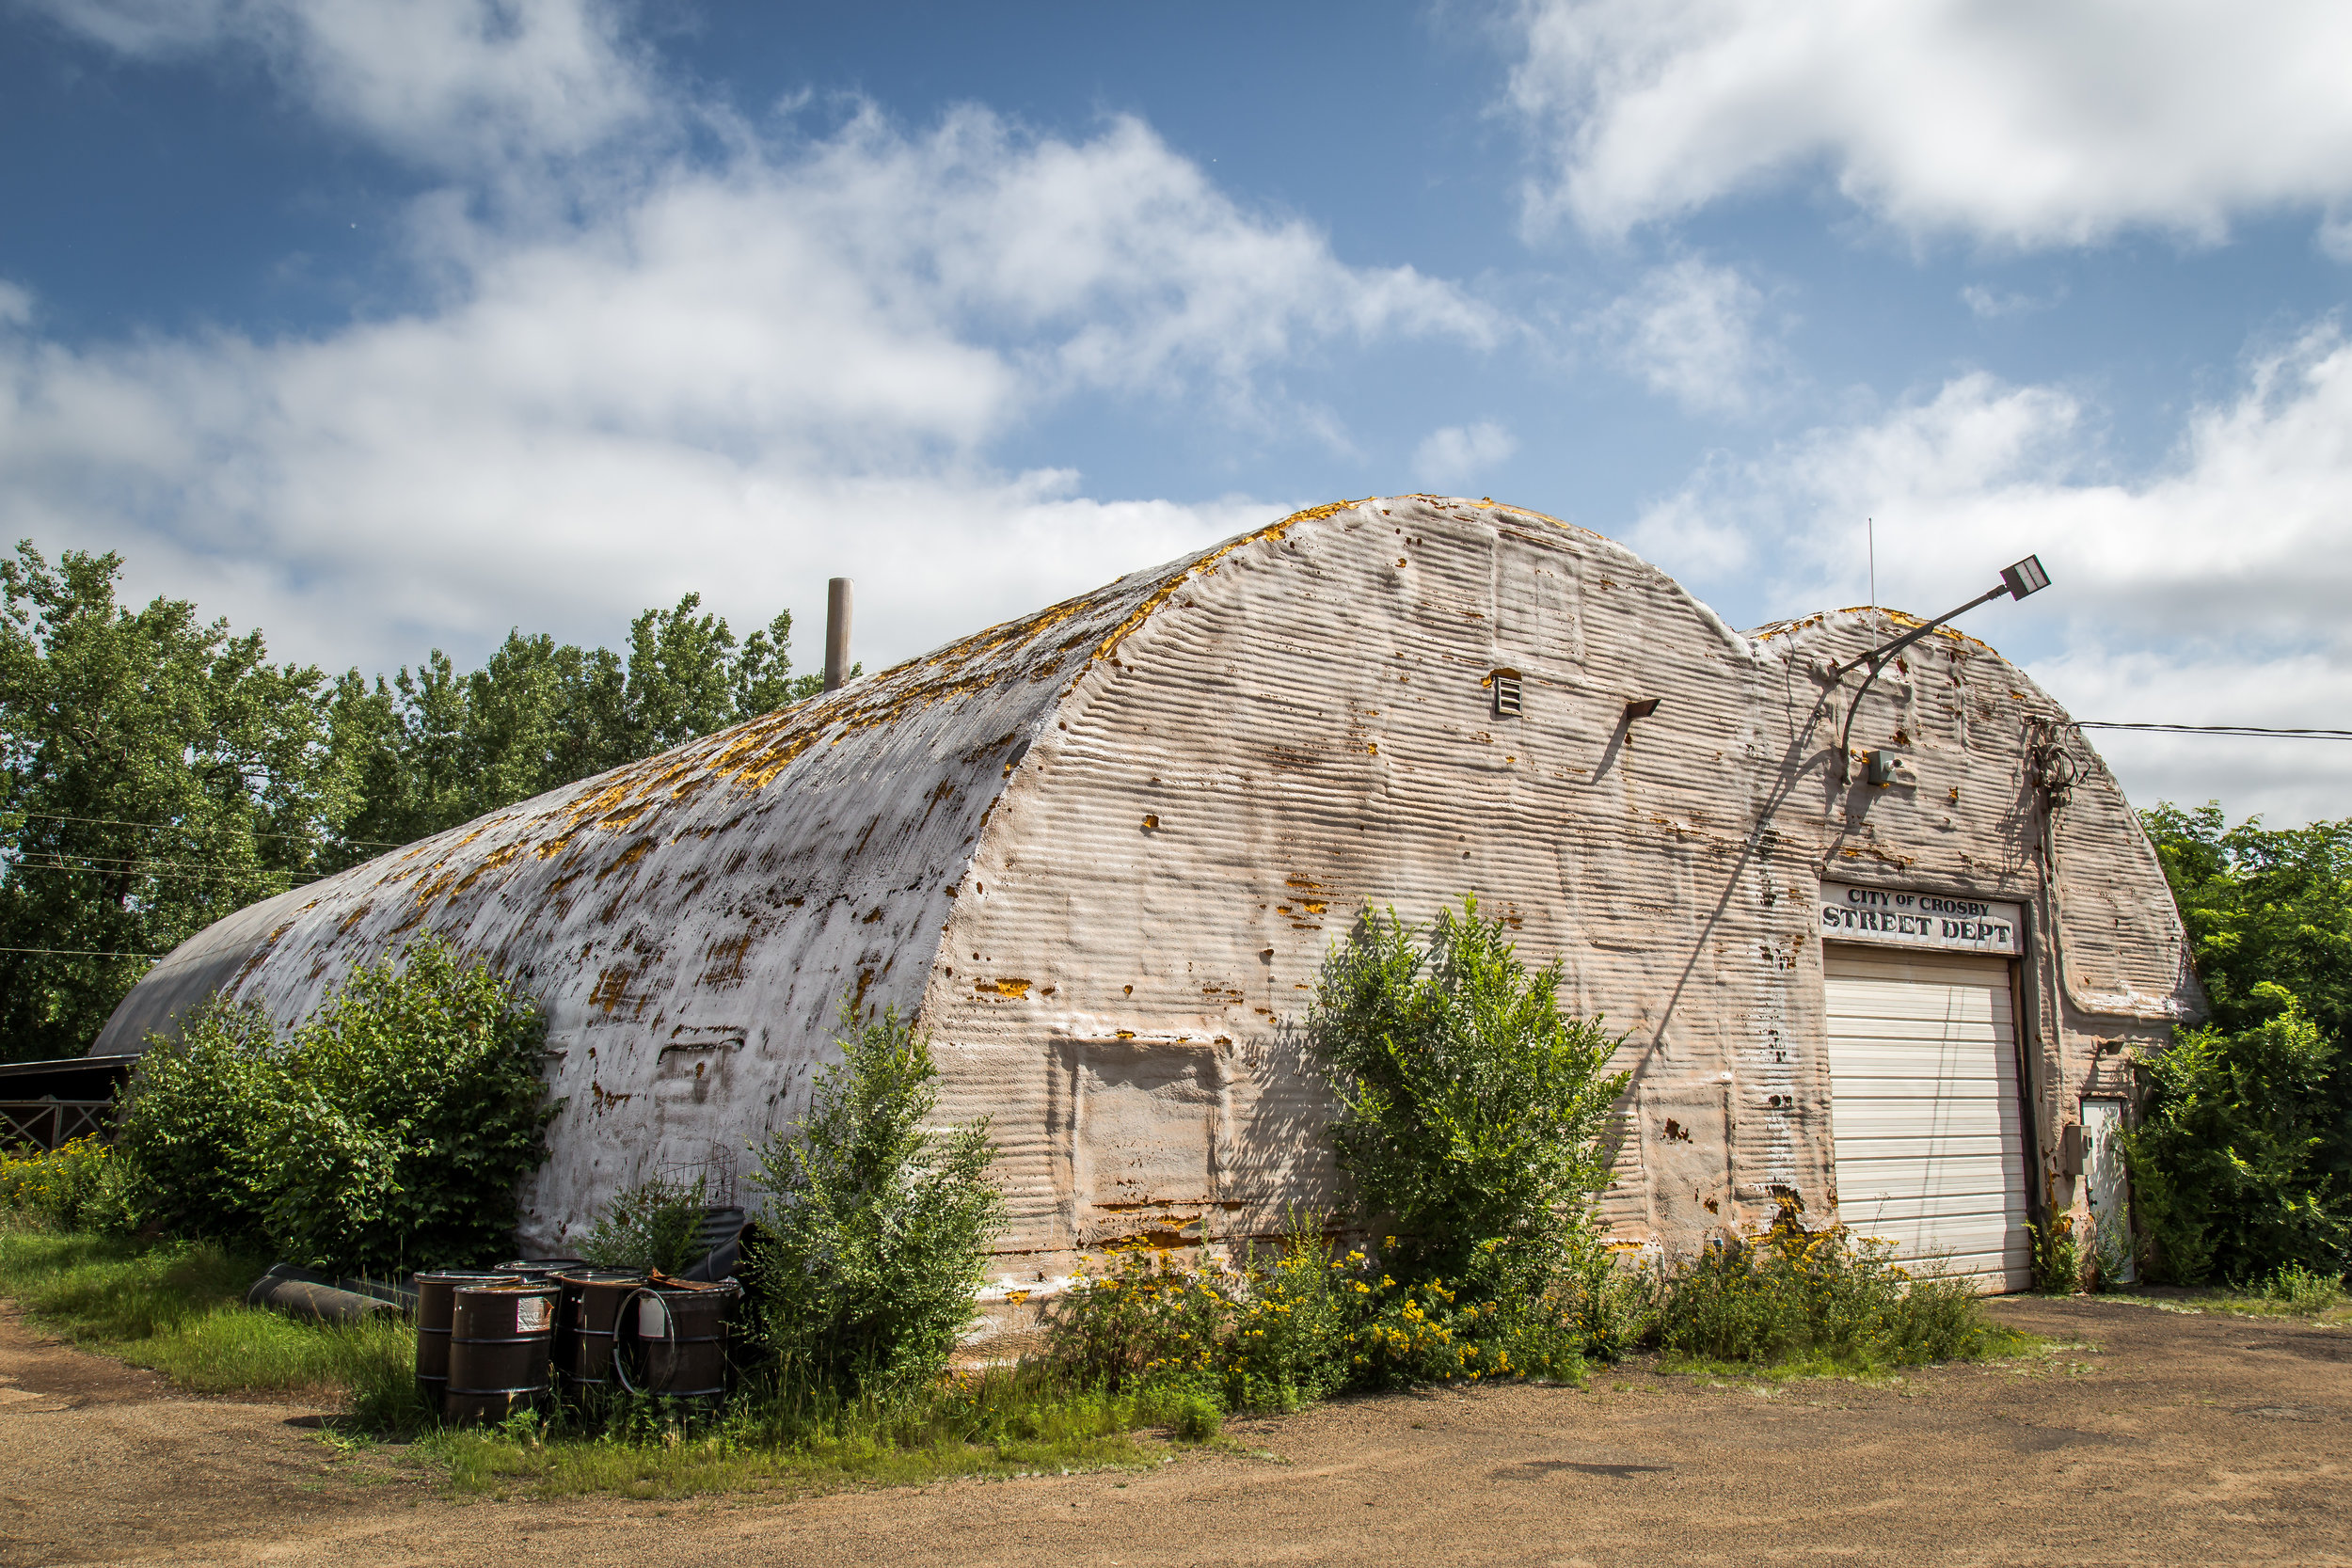 City of Crosby - Quonset Huts